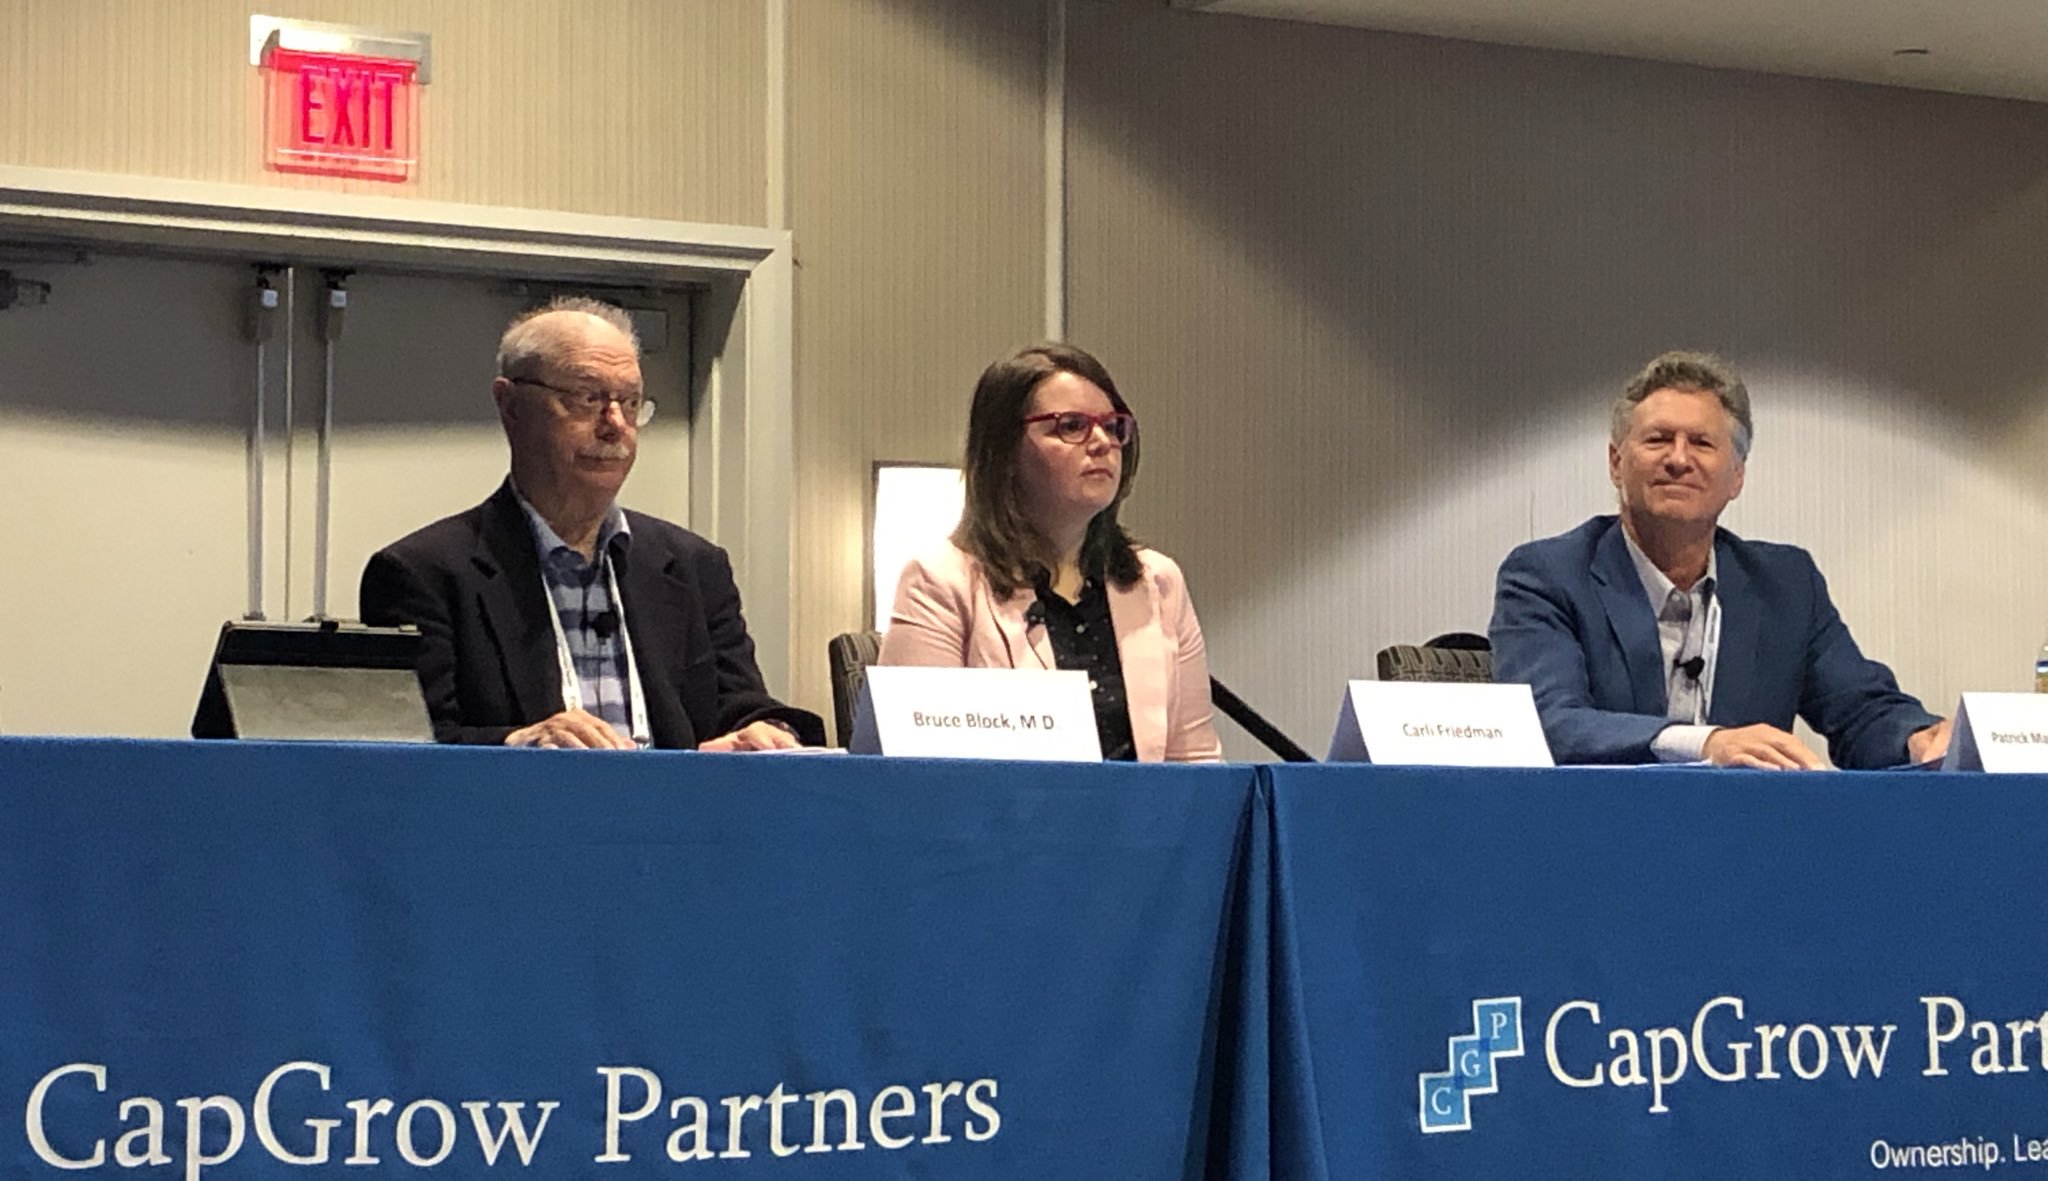 Bruce Block, MD, Chief Learning and Medical Informatics Officer,
PRHI; Carli Friedman, Director of Research, The Council on Quality and
Leadership; and Patrick Maynard, PhD, CEO & President, I Am
Boundless, Inc. at the 2019 I/DD Executive Summit.